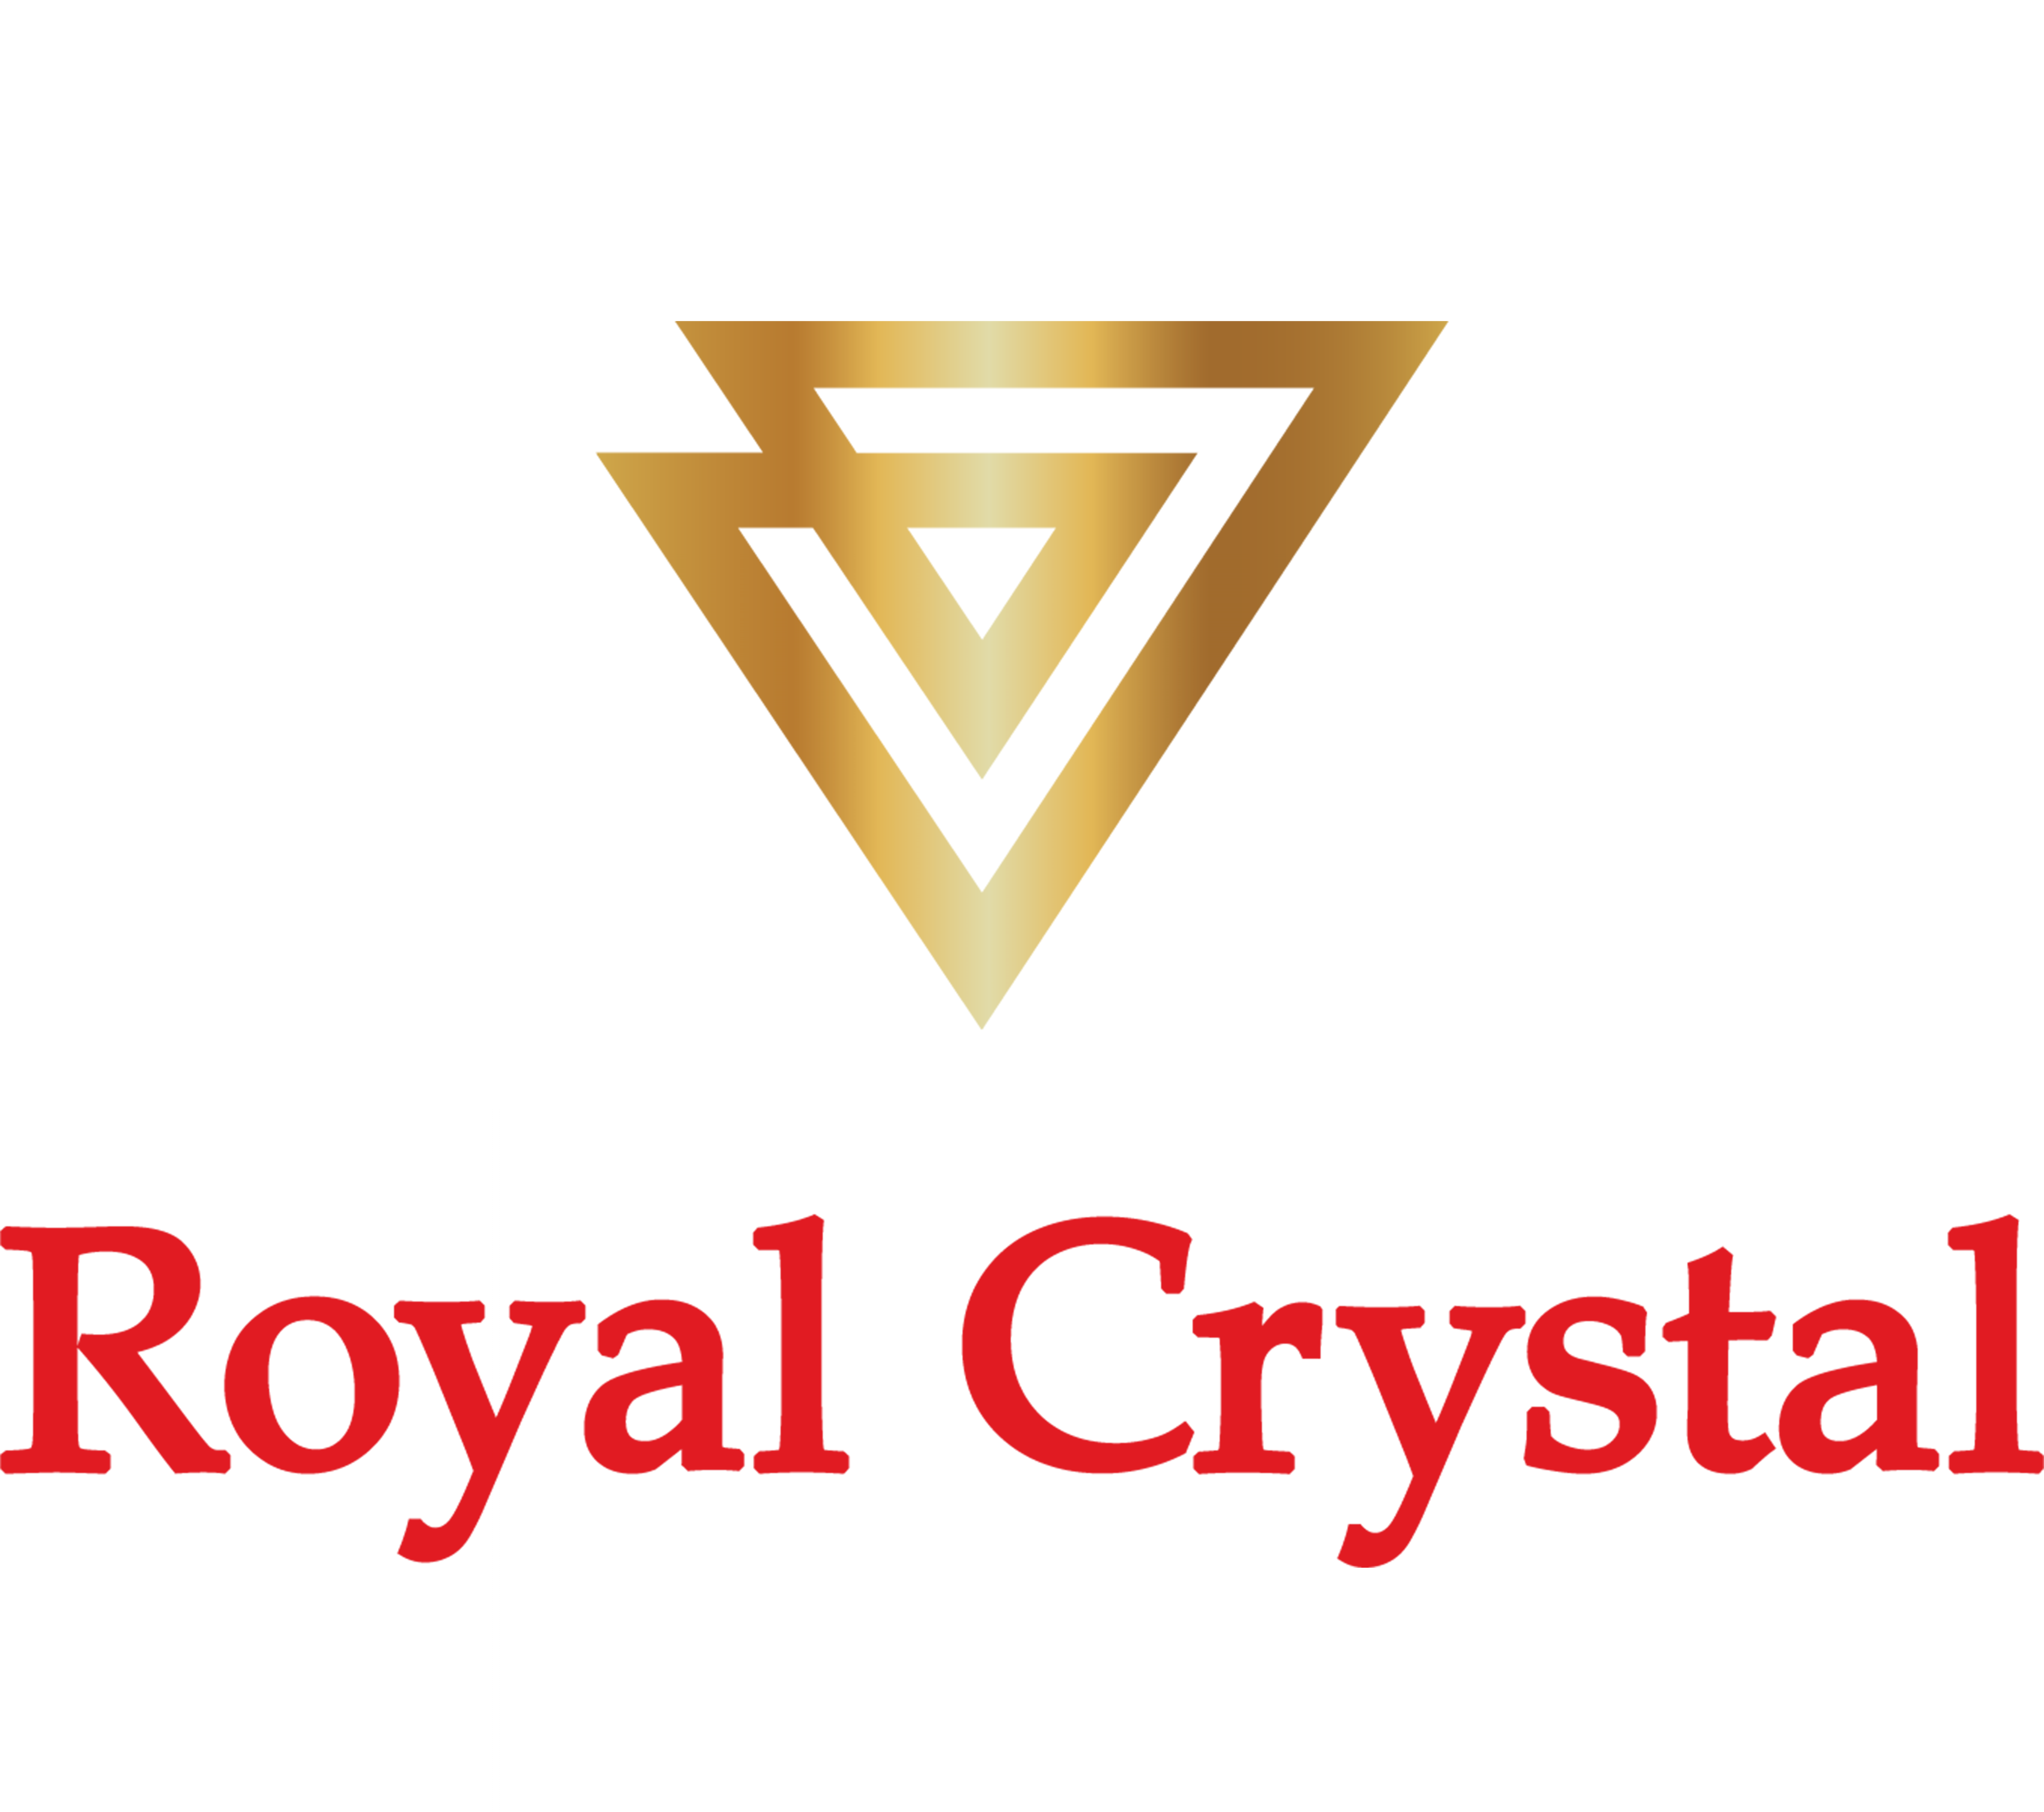 ROYAL CRYSTAL MANUFACTURING AND MATERIALS TECHNOLOGY JOINT STOCK COMPANY